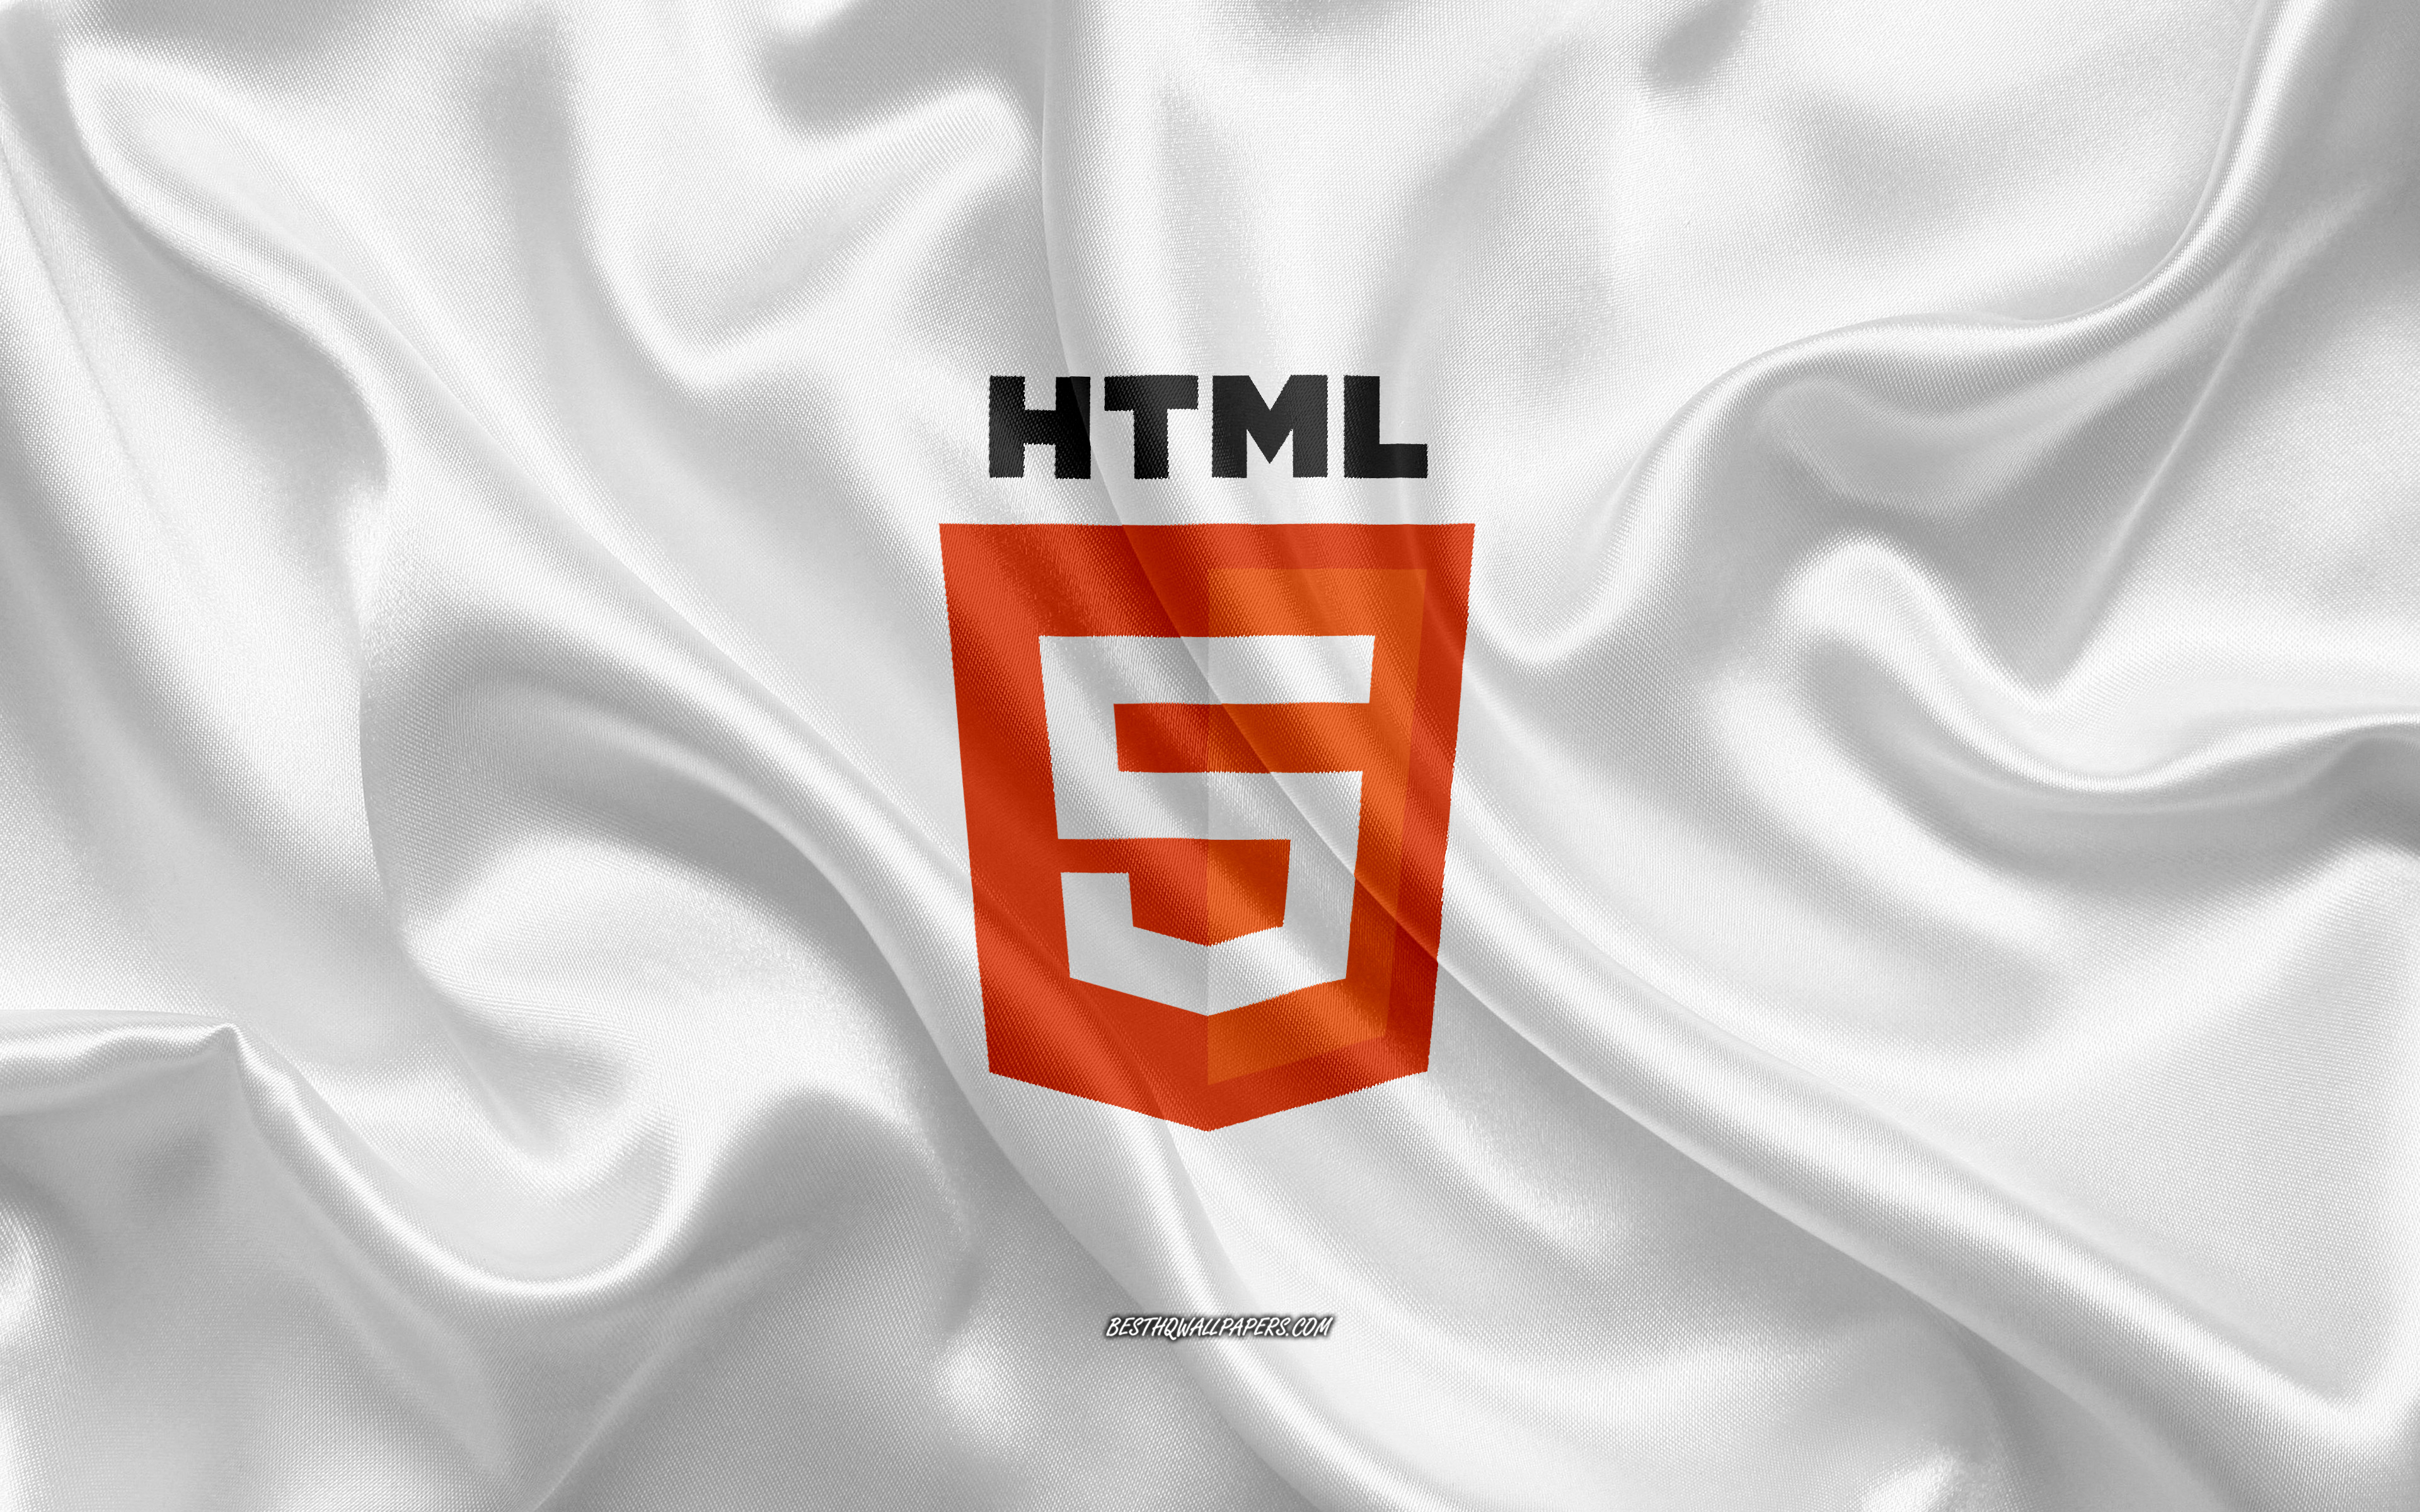 Download wallpaper HTML5 logo, white silk texture, HTML5 emblem, programming language, HTML, silk background for desktop with resolution 3840x2400. High Quality HD picture wallpaper